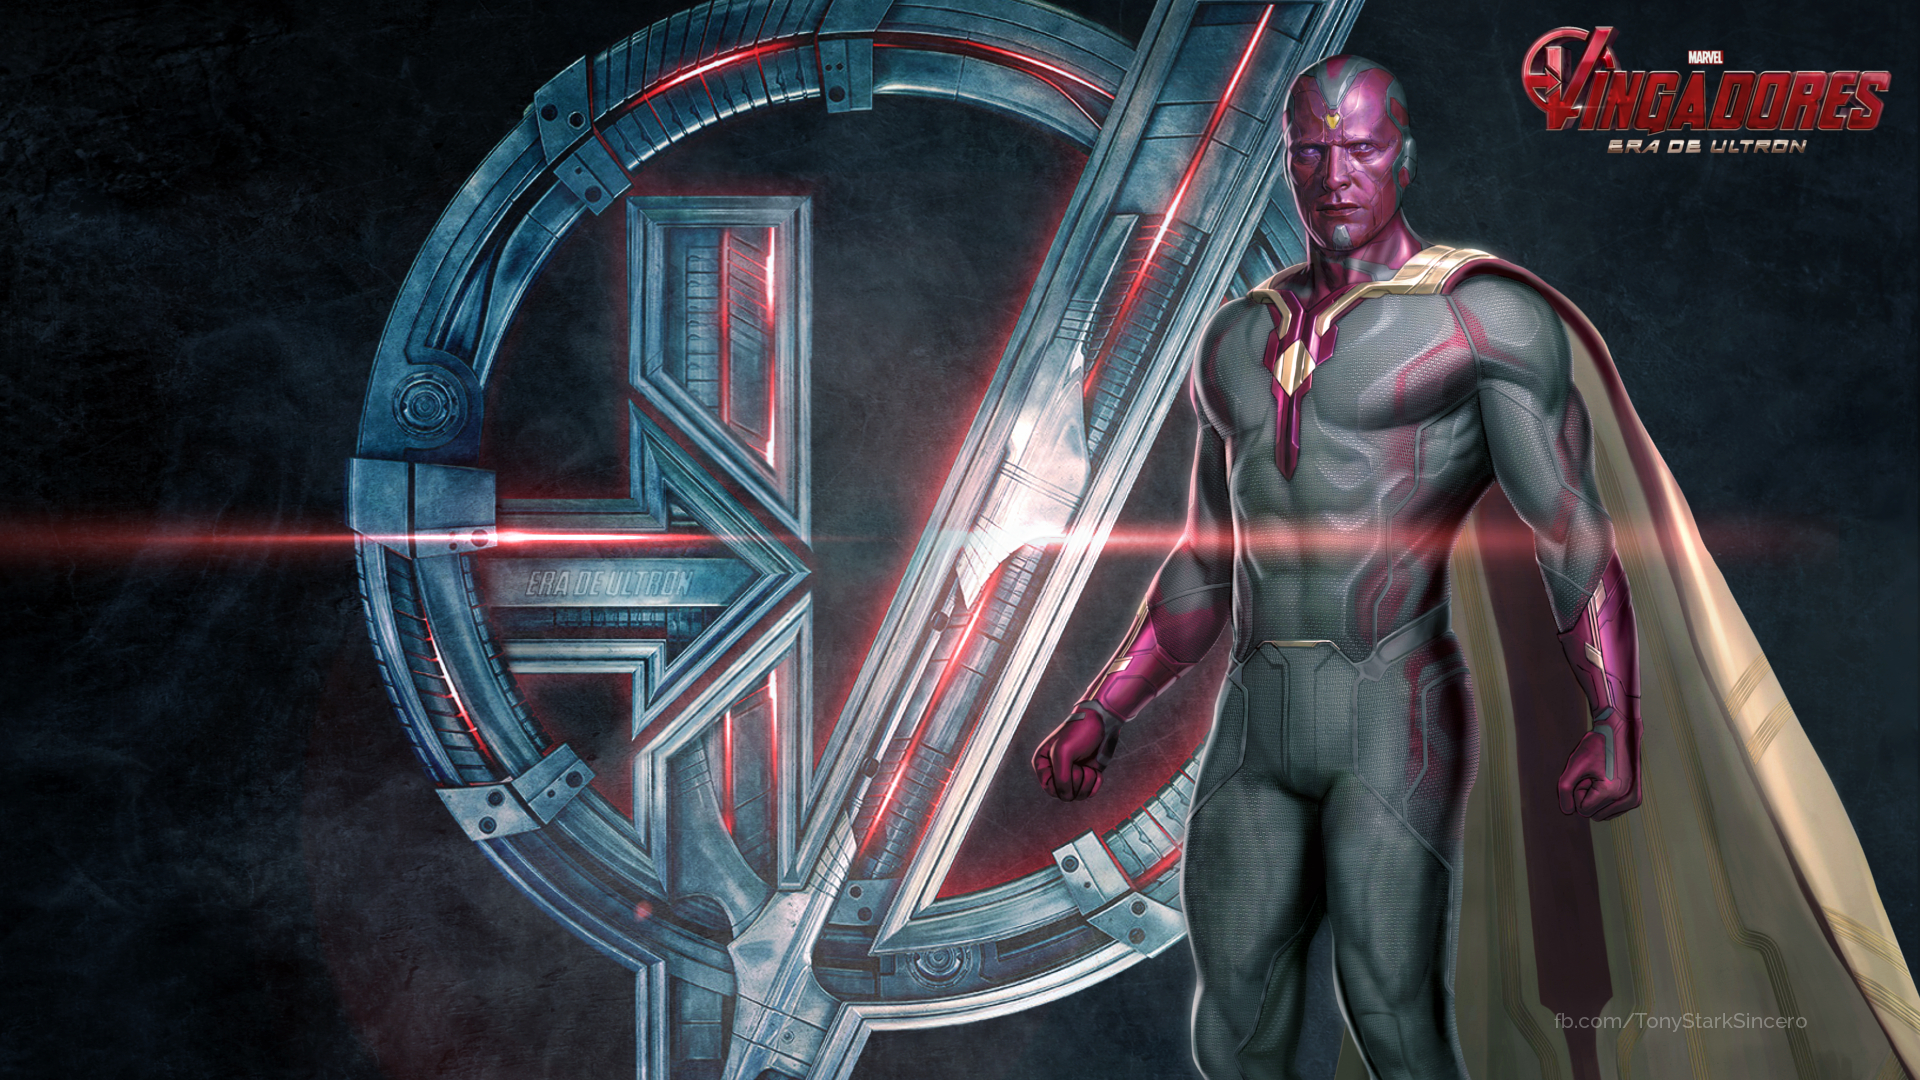 vision (marvel comics), movie, avengers: age of ultron, logo, paul bettany, the avengers